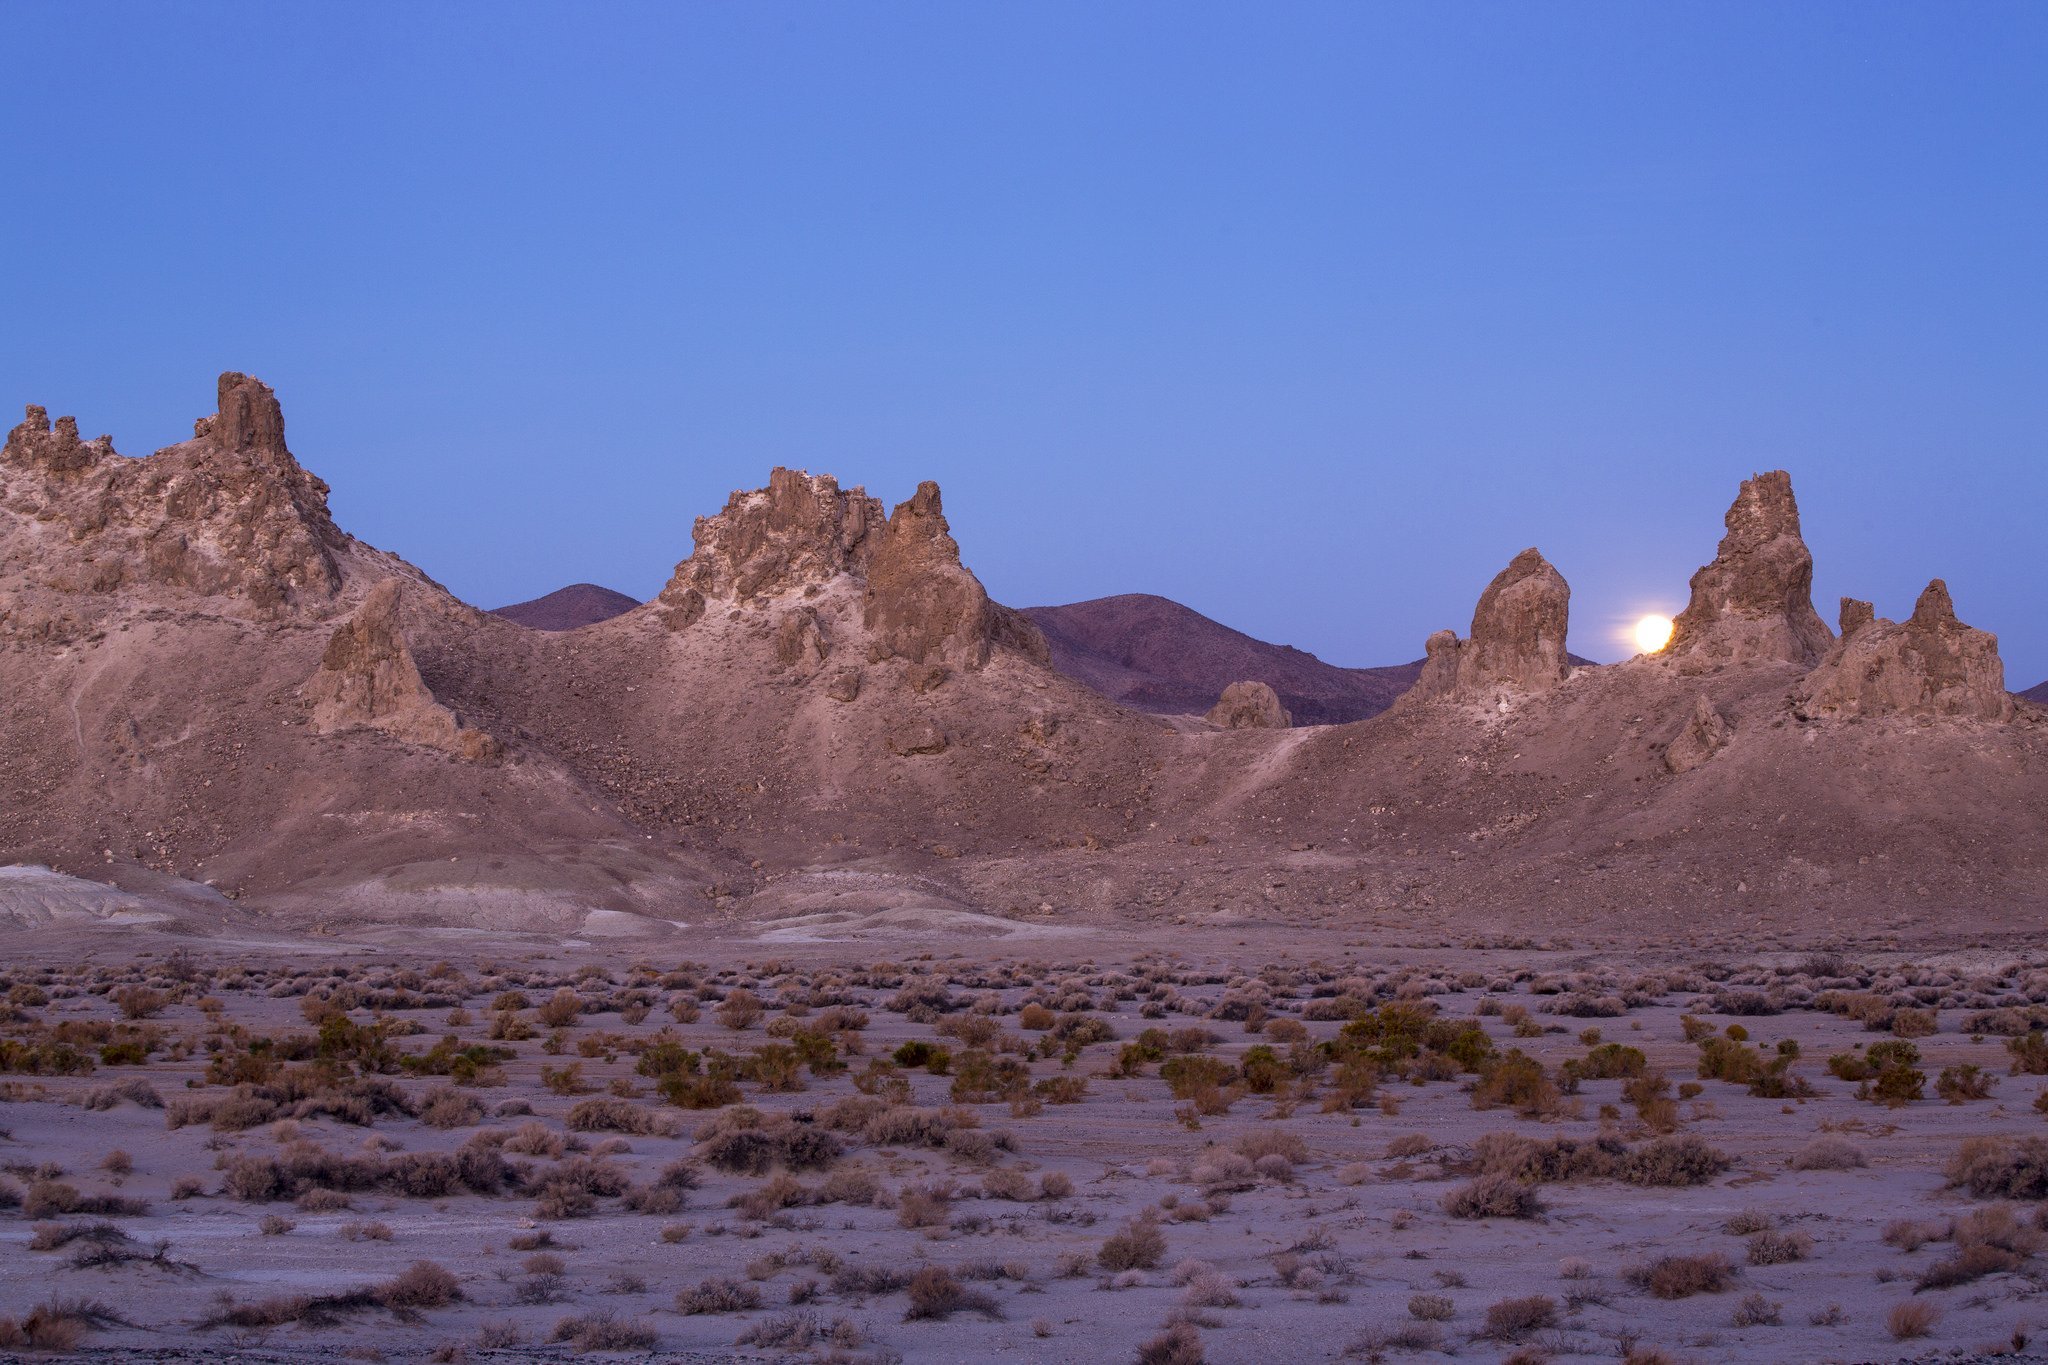 BLM_Winter_Bucket_List_-7-_Trona_Pinnacles,_California,_for_Out_of_This_World_Rock_Formations_(15515503494).jpeg